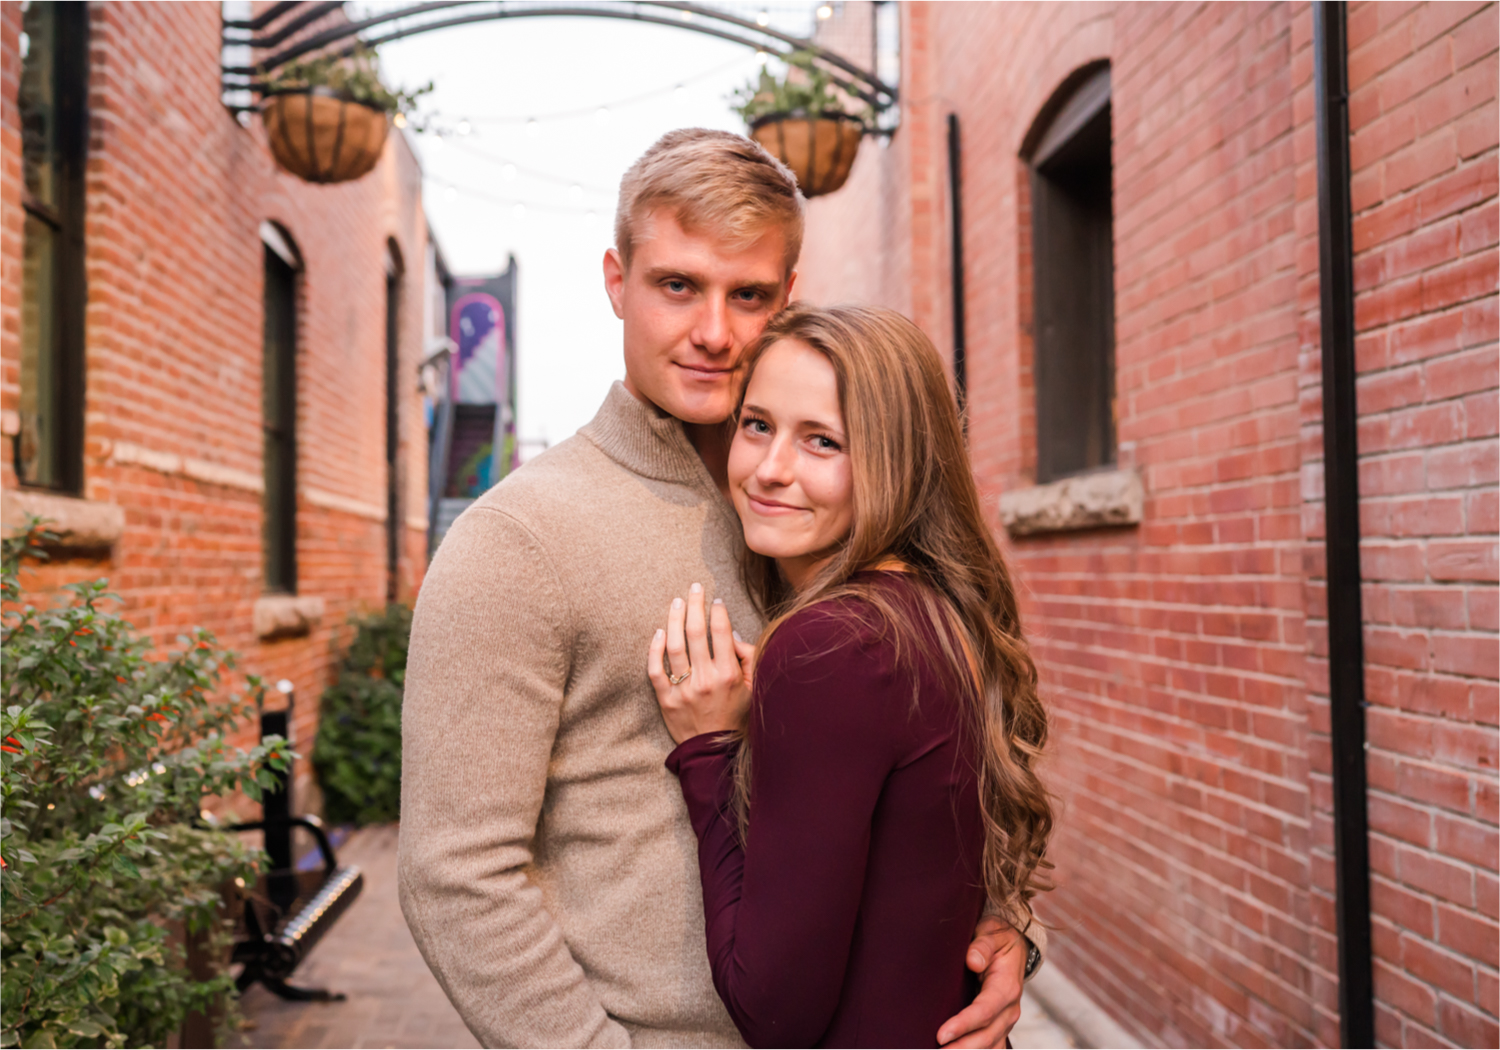 Fall Engagement in Old Town Fort Collins | Britni Girard Photography | Colorado Wedding Photography and Videography | Husband and Wife Team | Wandering the alley's and old town square with twinkle lights all around